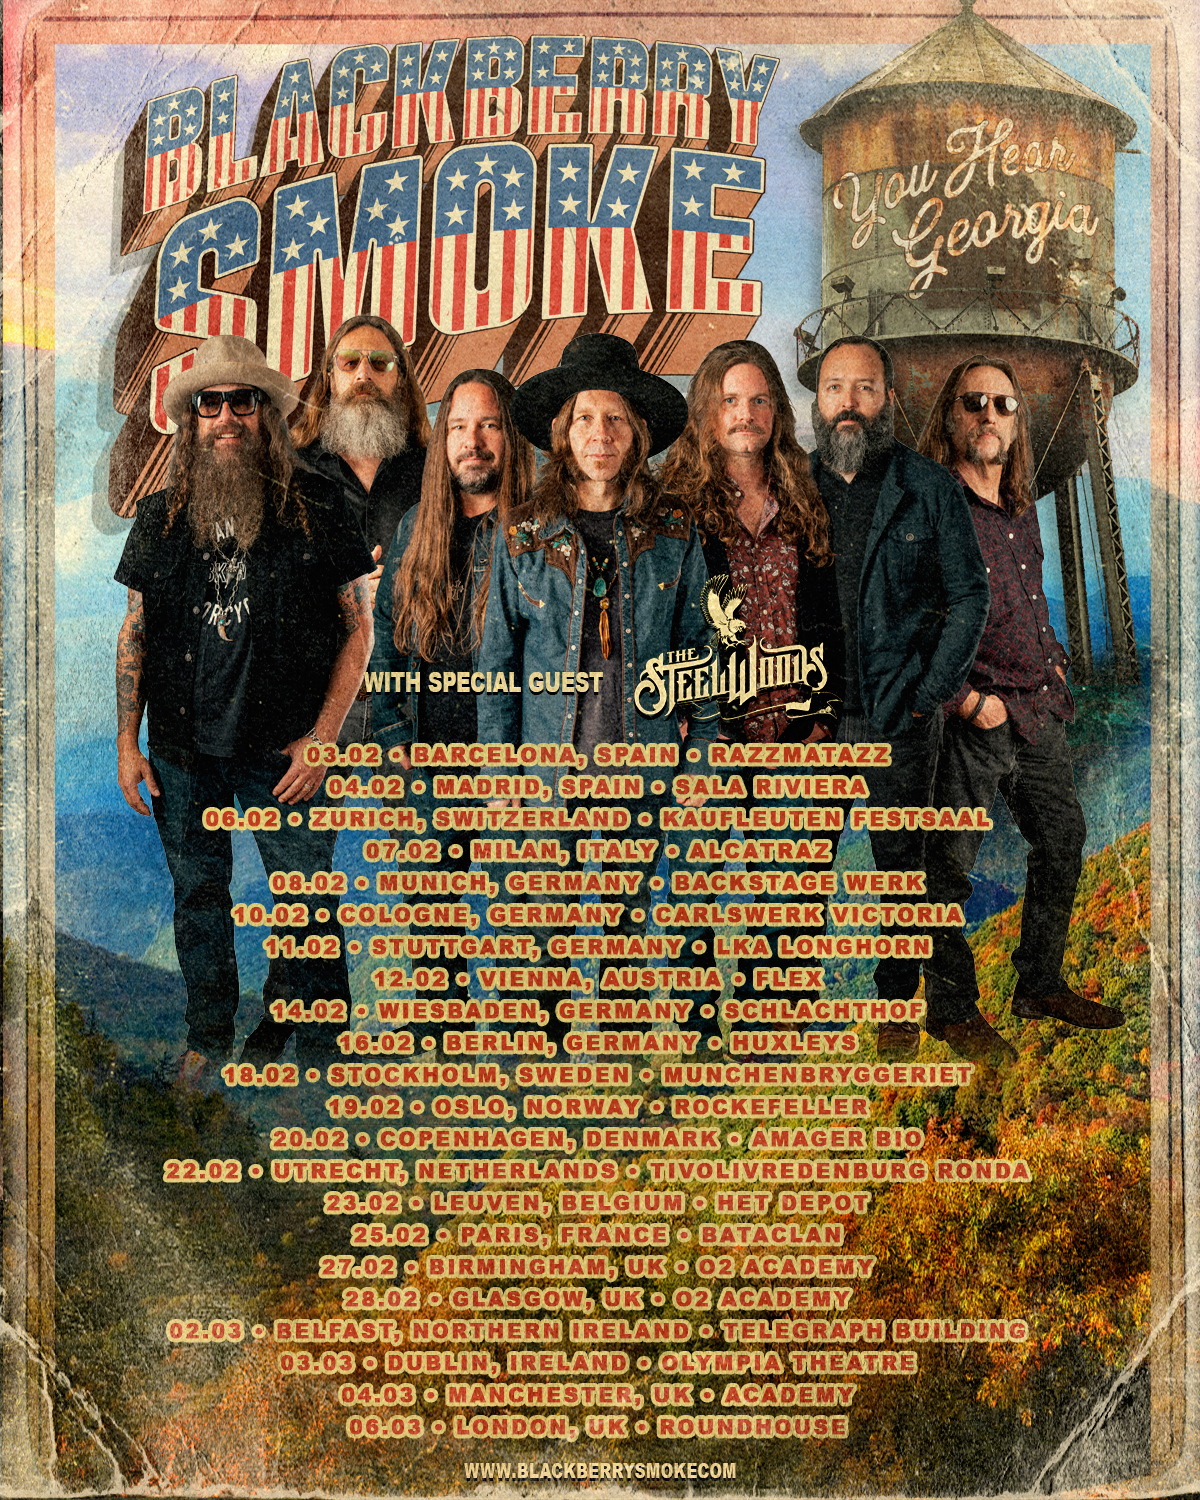 BLACKBERRY SMOKE Announce 2022 UK tour Tickets On General Sale 9am